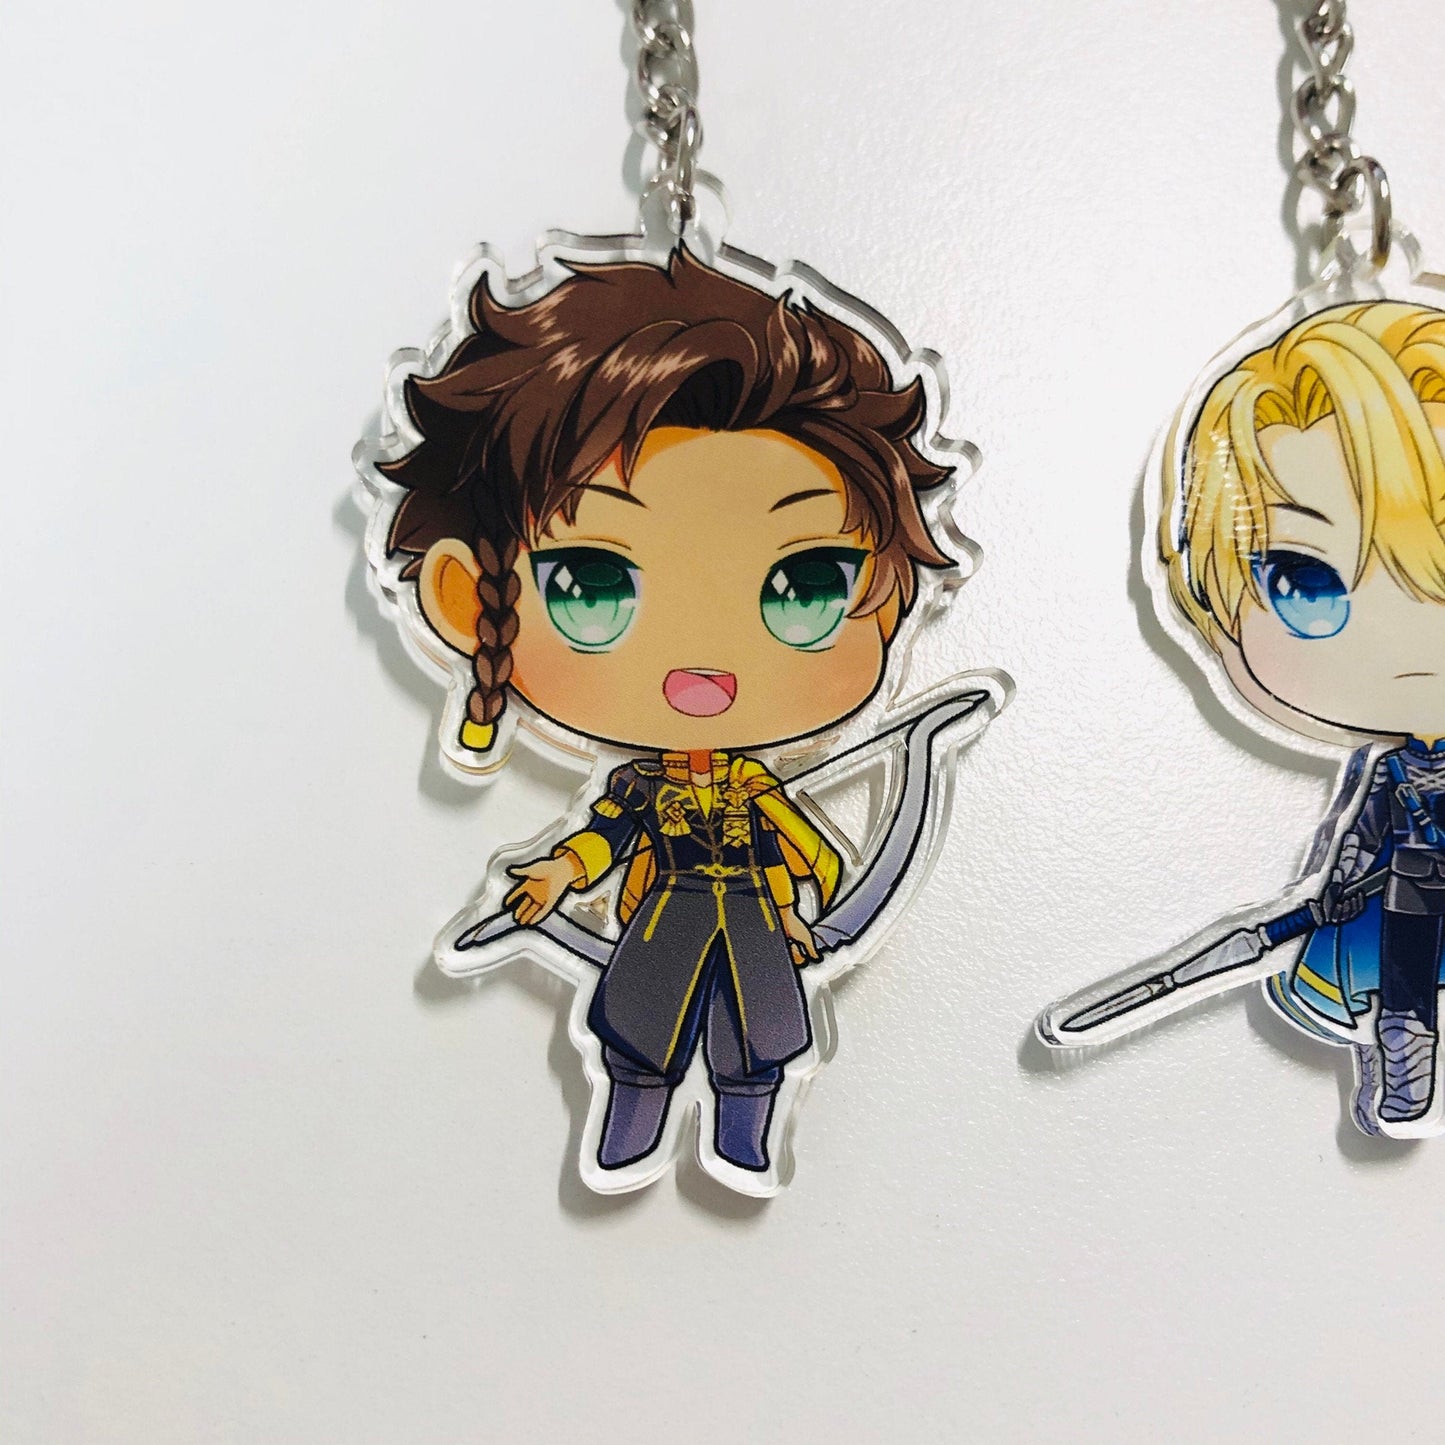 Fire Emblem Three houses Double Sided Clear Acrylic Charms Claude Dimitri Edelgard